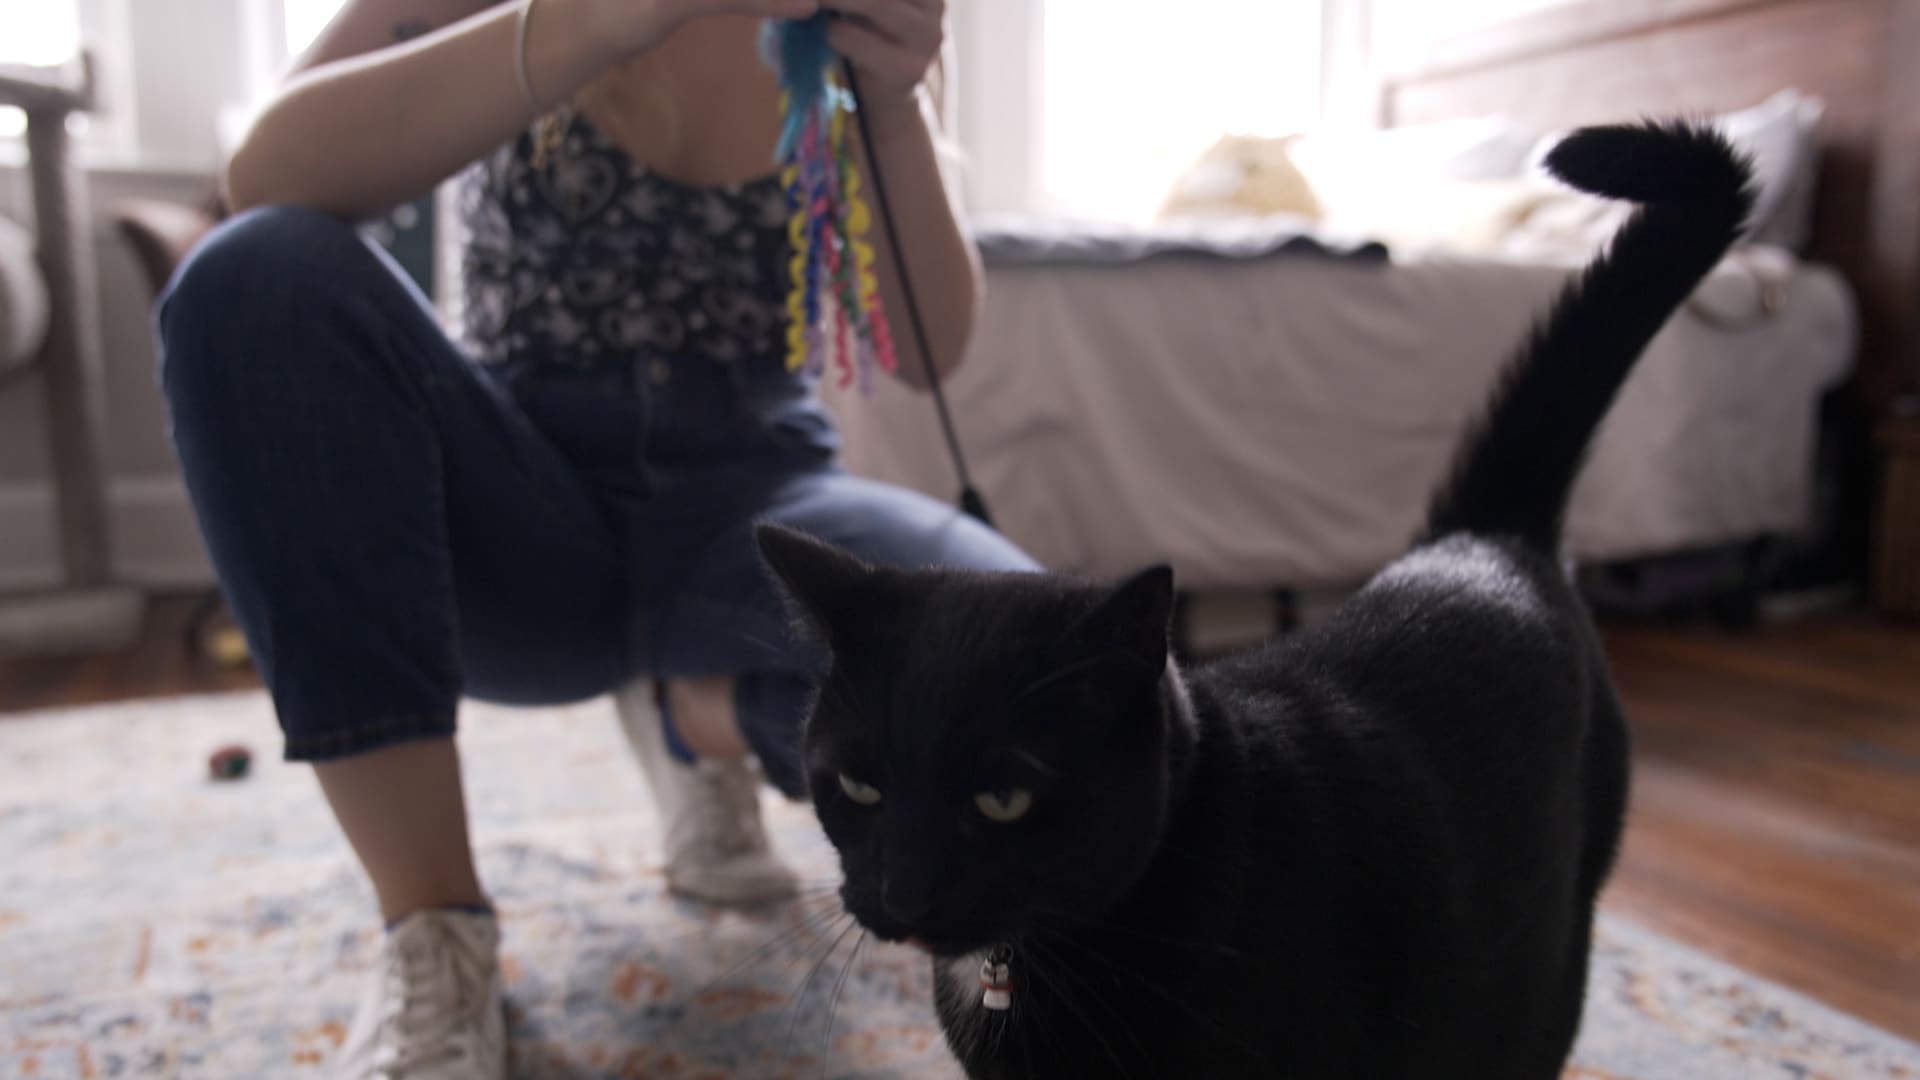 Aspeyn Langhals shares a 275-square-foot apartment with her cat, Daniel.